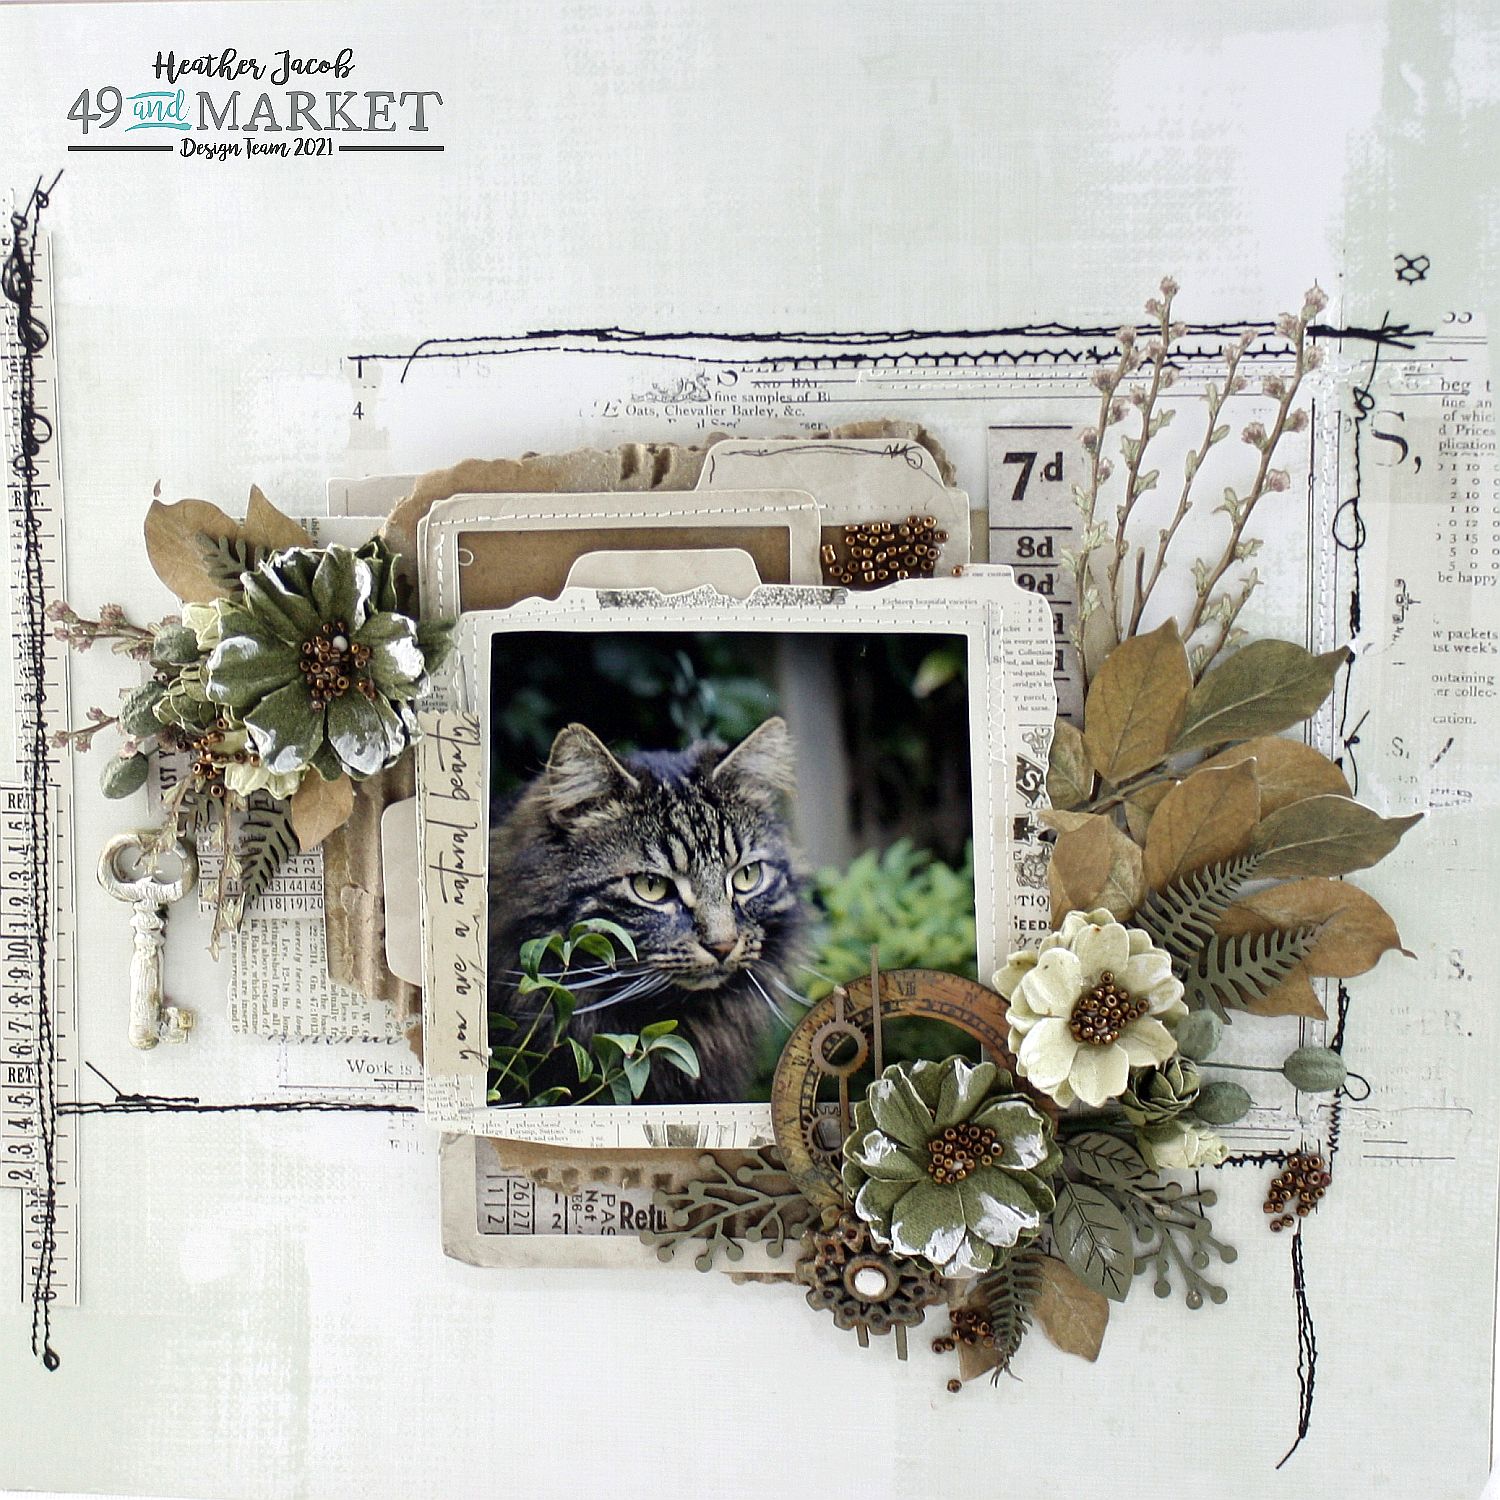 You are a natural beauty - Layout by Heather Jacob